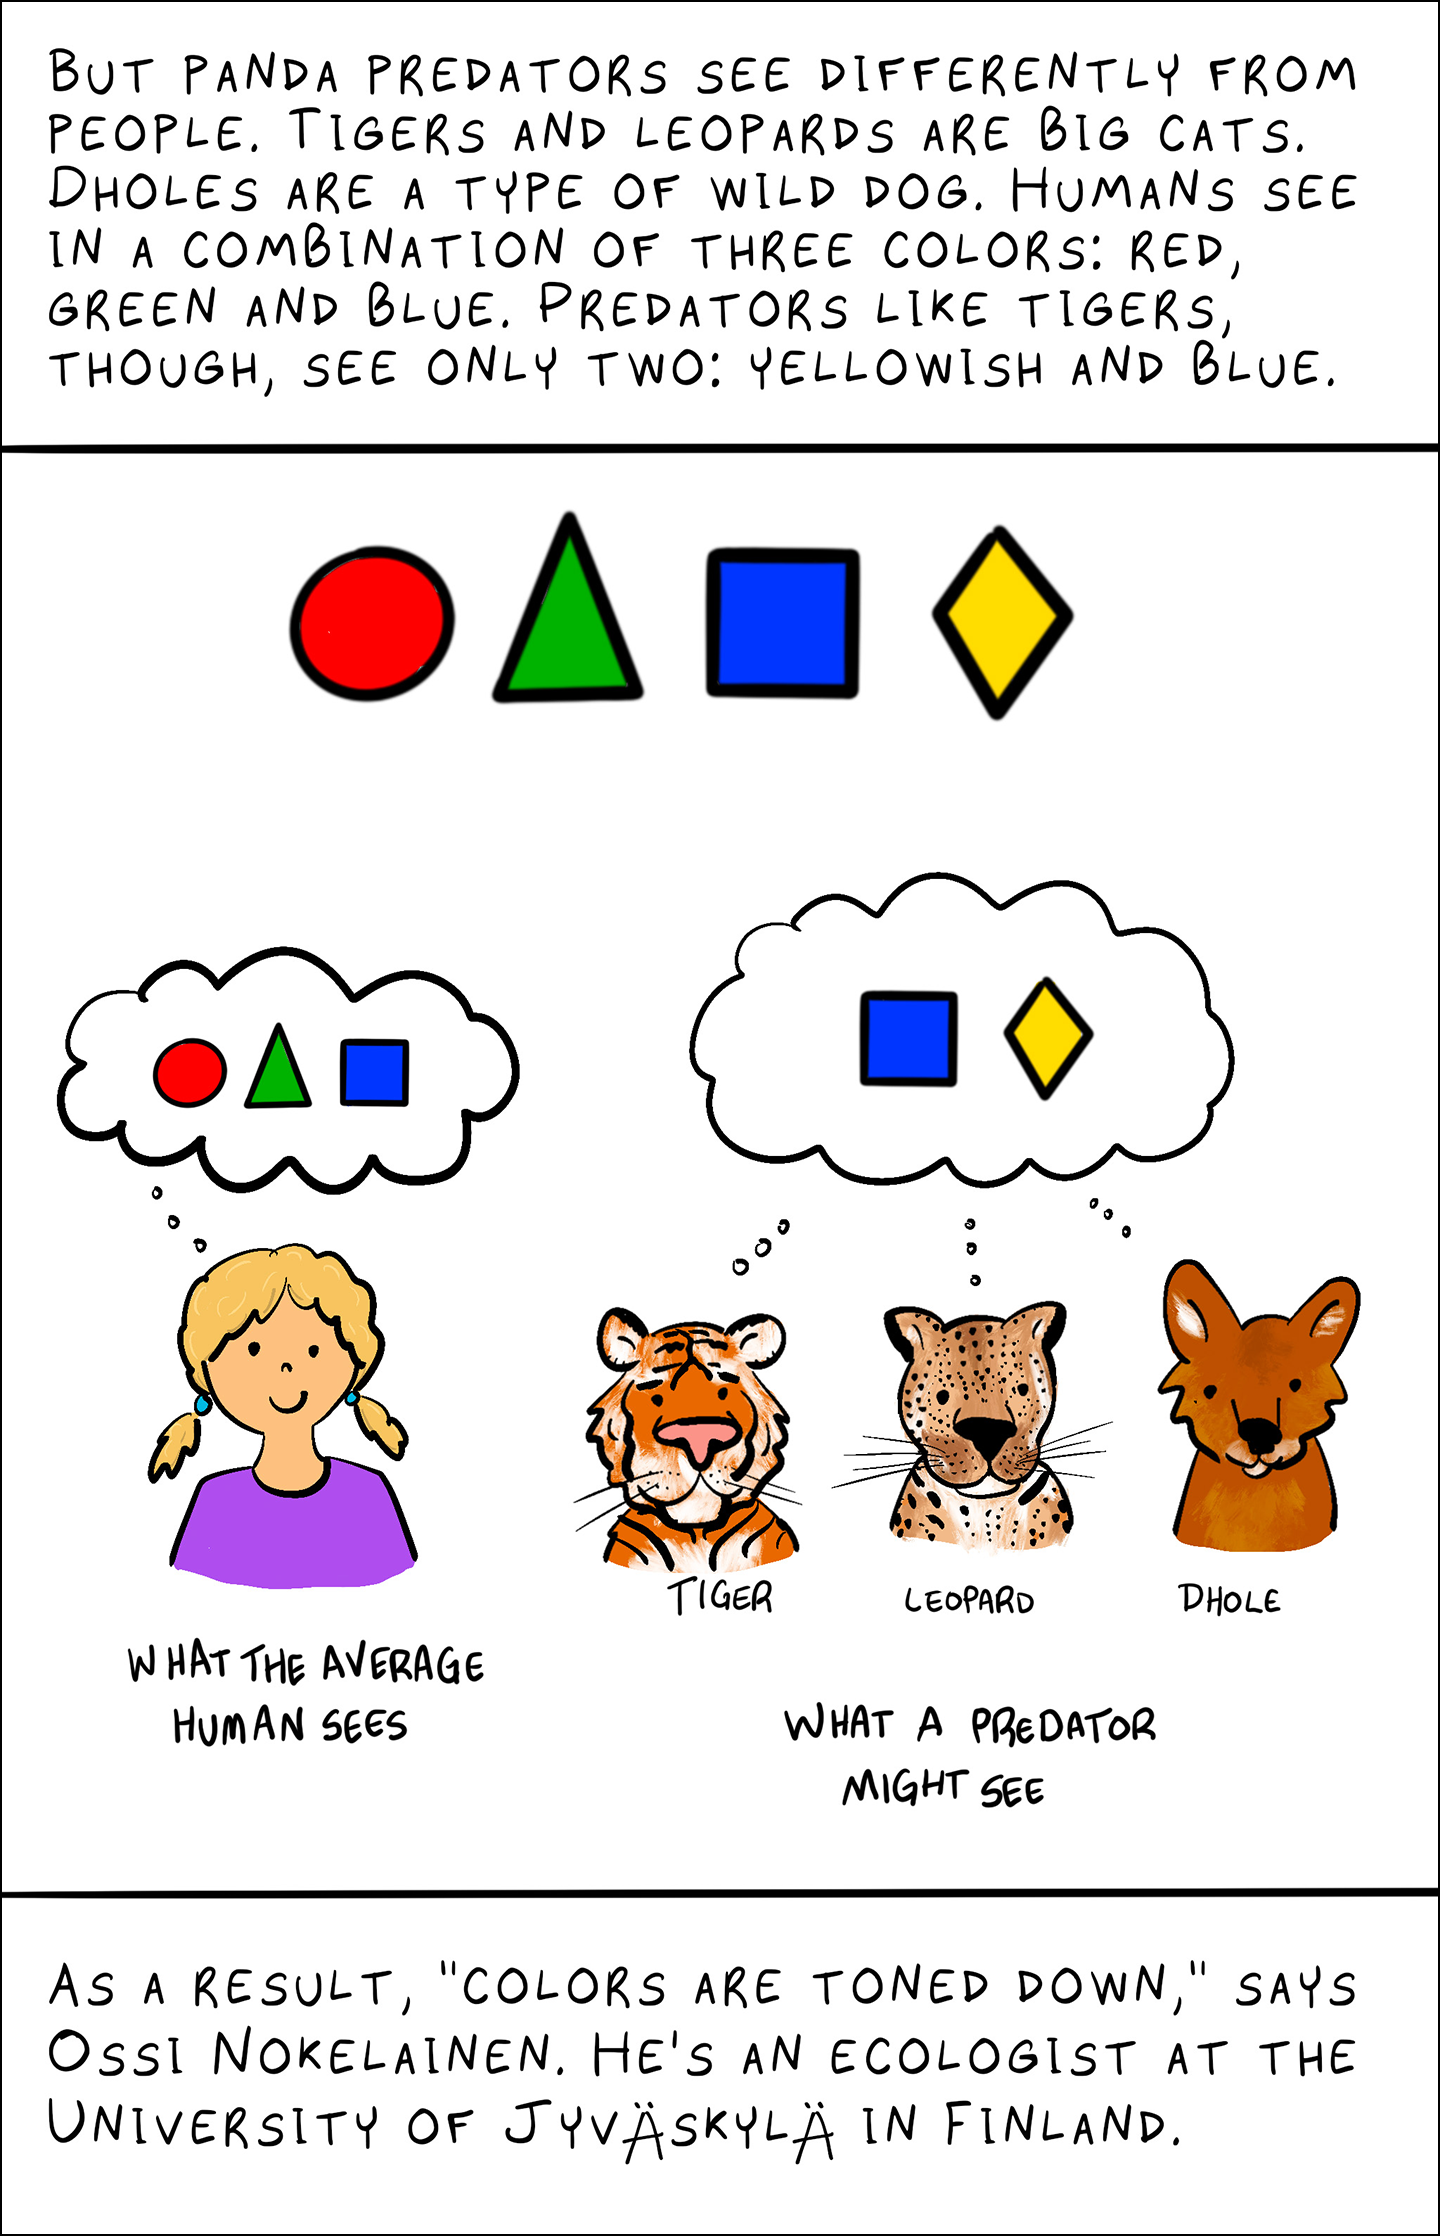 Text: But panda predators see differently from people. Tigers and leopards are big cats. Dholes are a type of wild dog. Humans see in a combination of three colors: red, green and blue. Predators like tigers, though, see only two: yellowish and blue. What the average human sees What a predator might see As a result, “colors are toned down,” says Ossi Nokelainen. He’s an ecologist at the University of Jyväskylä in Finland. Image: A red circle, green triangle, blue square and yellow diamon float above girl, a tigert, a leopard and a dhole. All are shown from shoulders up. The girl has a thought bubble above her head with the circle, triangle and square. Below her text reads "What the average human sees". The animals have a shared thought bubble above their heads containing a square and a diamond. Text below them reads "What a predator might see"